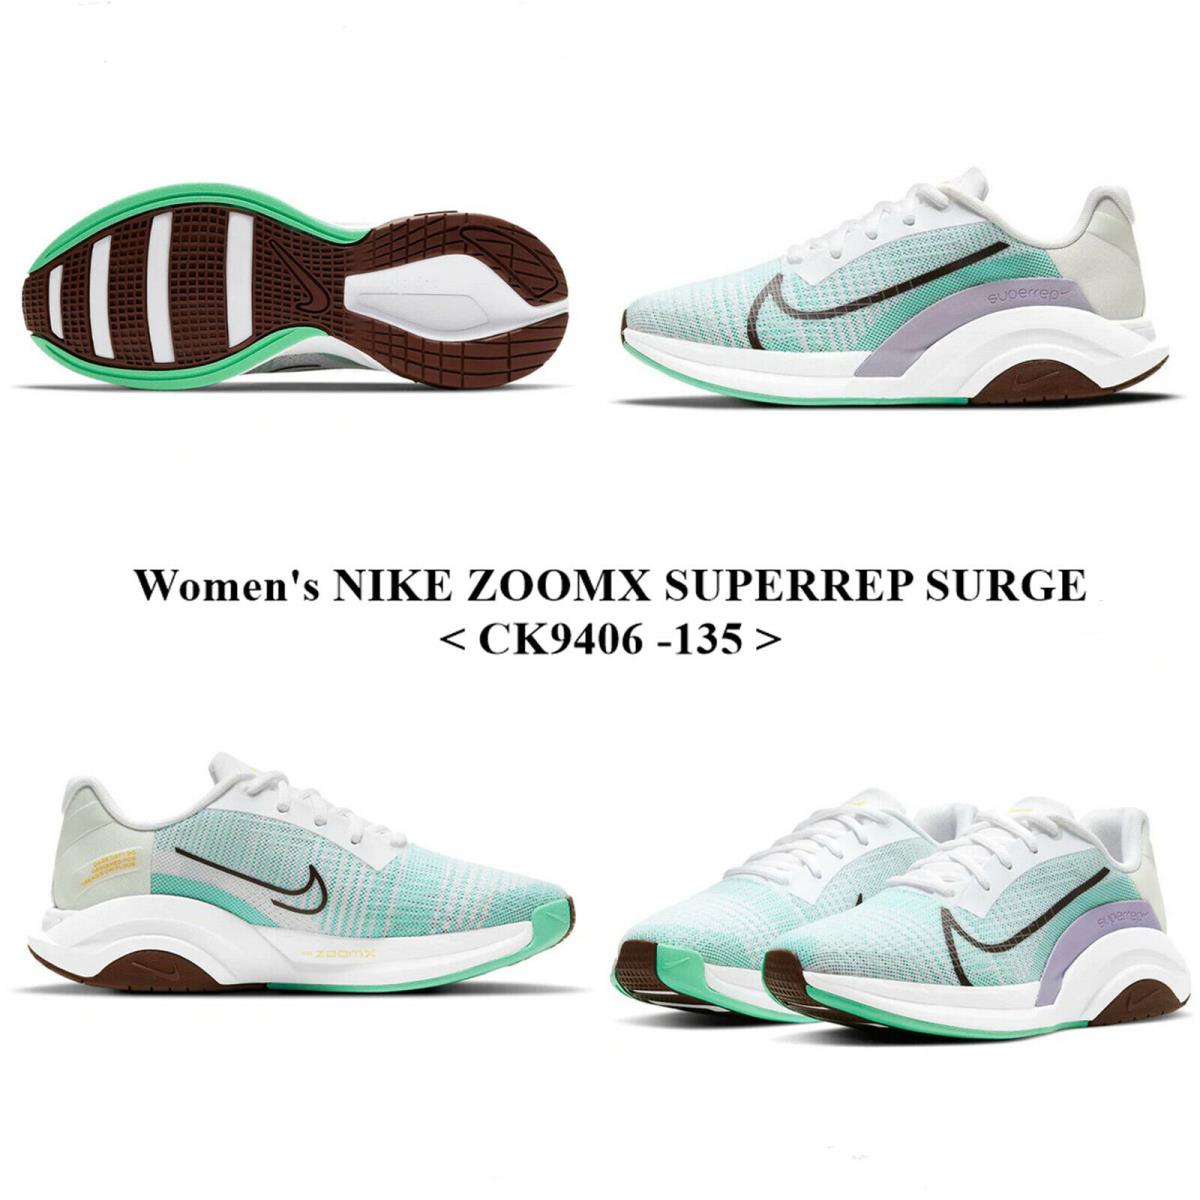 Nike Zoomx Superrep Surge CK9406-135 Women`s Running Shoe with Box-no Lid